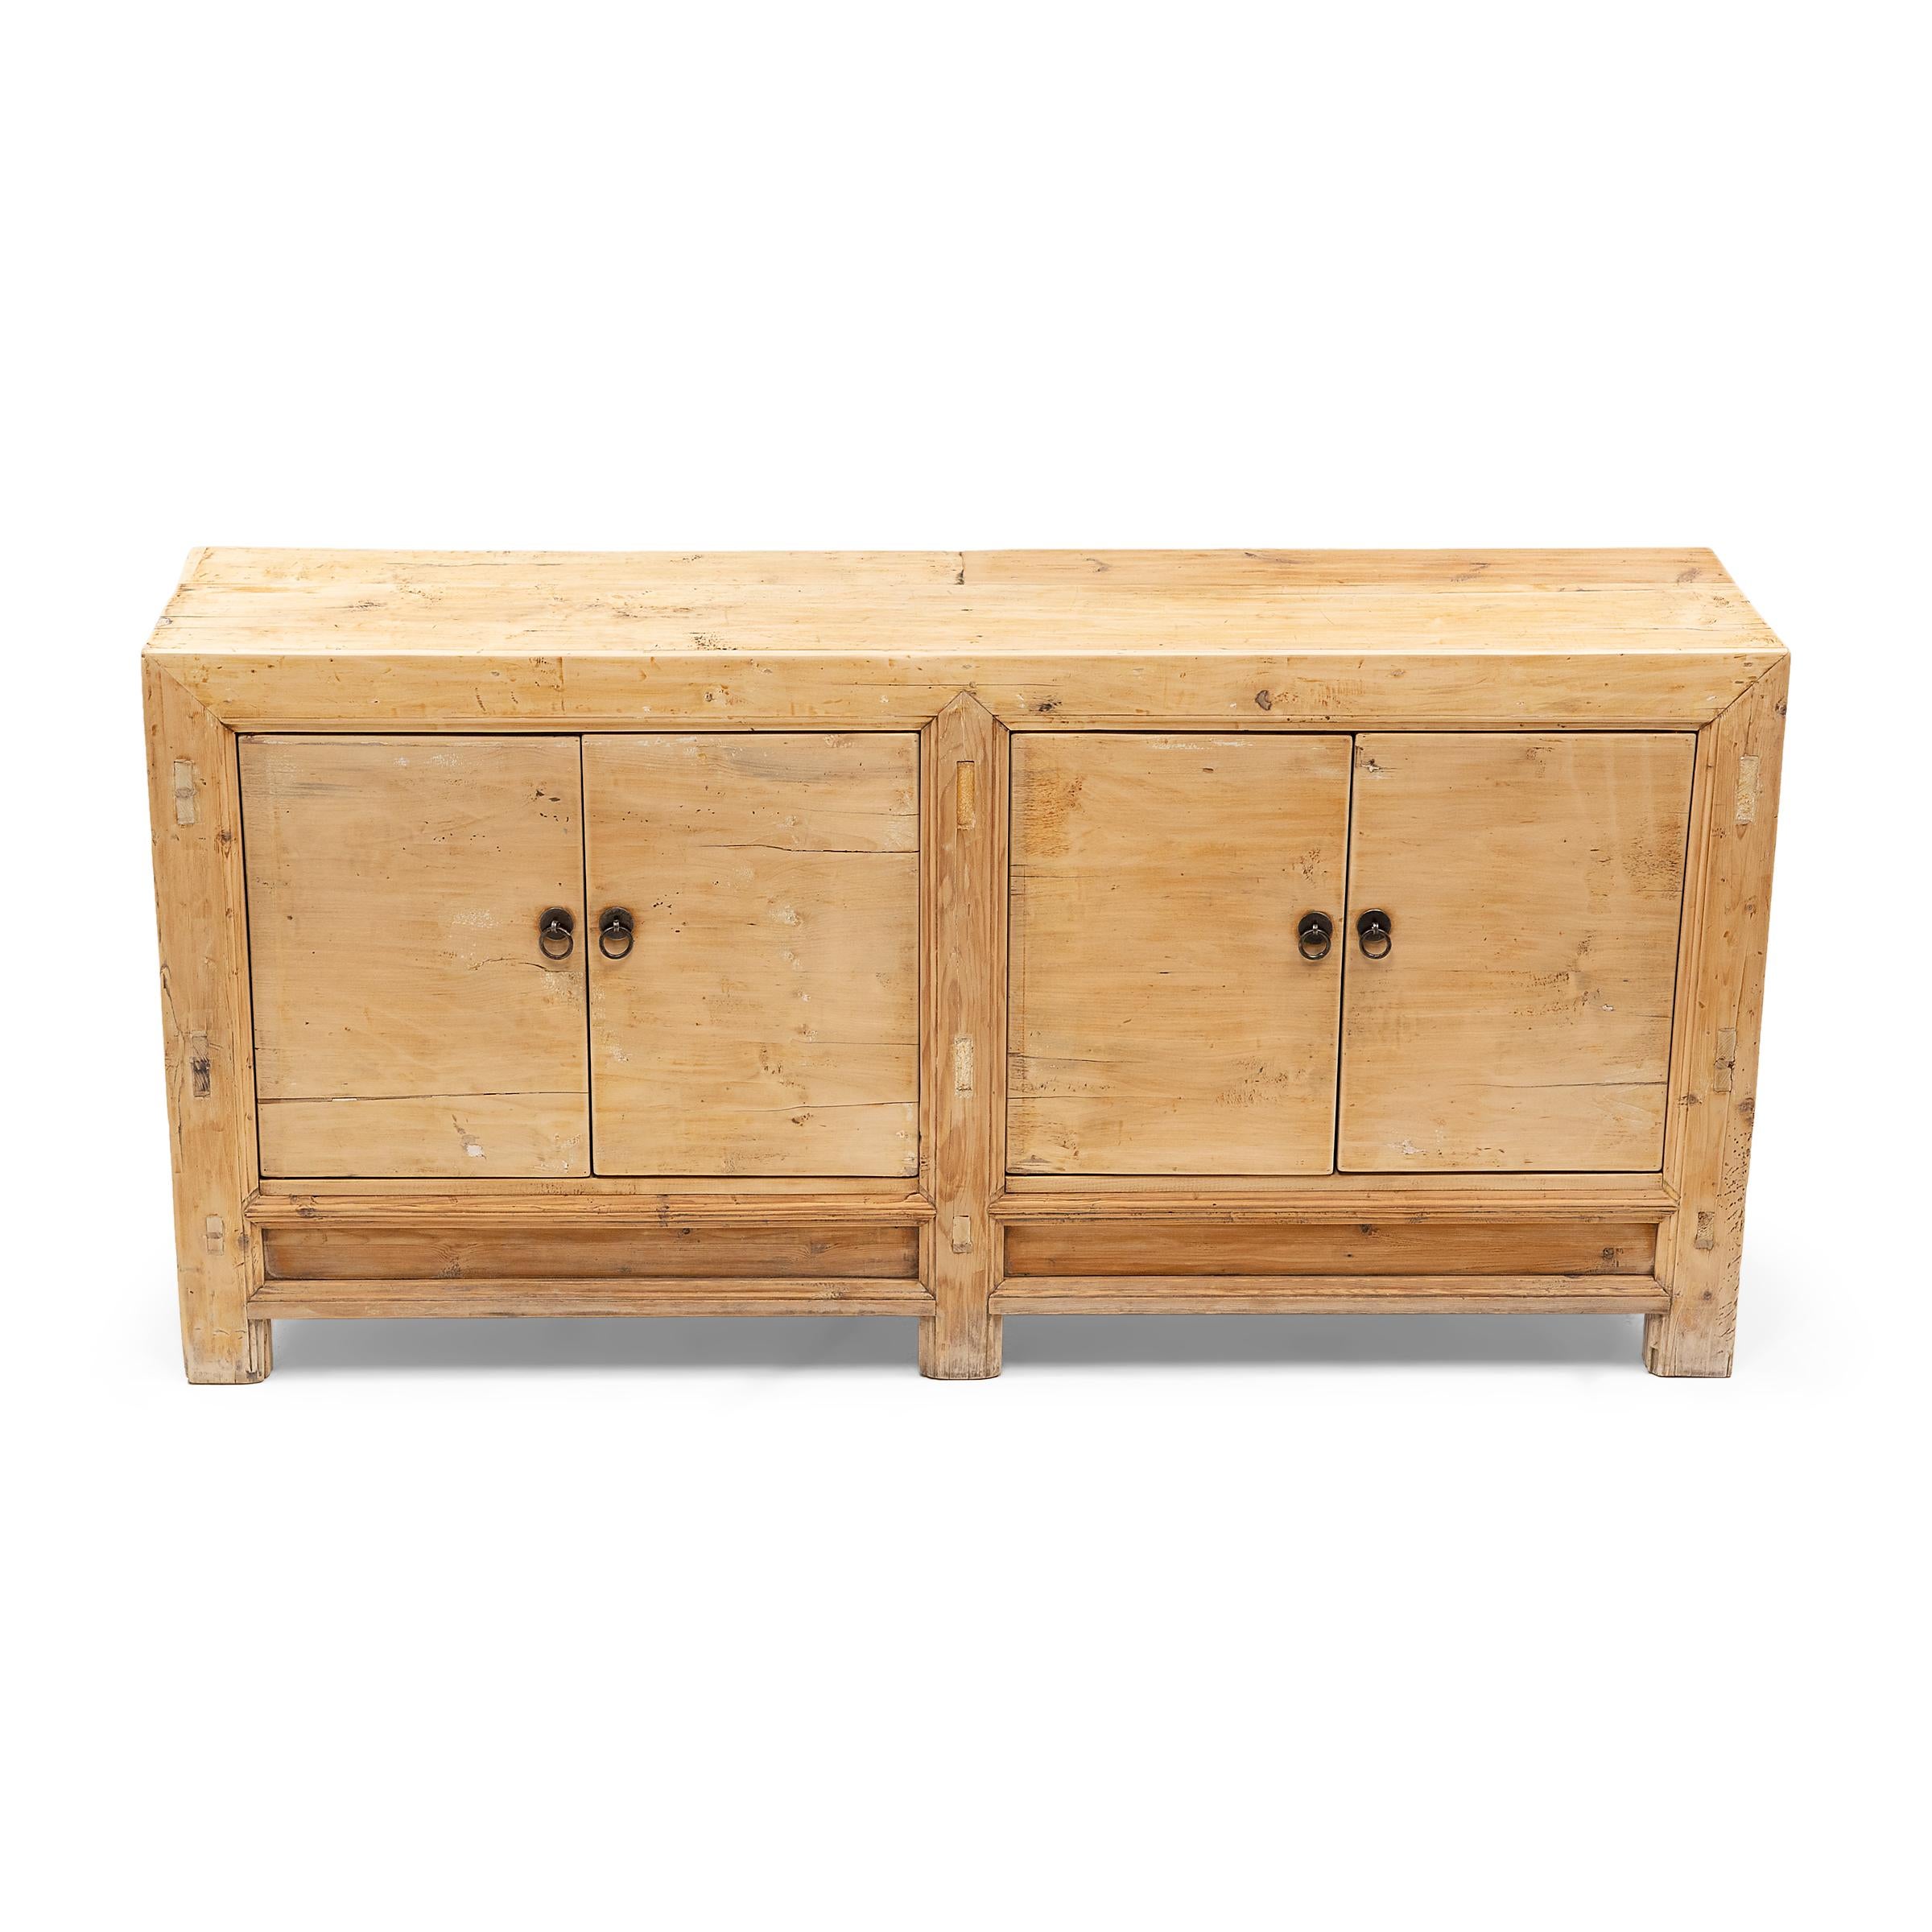 Pine Chinese Four Door Steppe Coffer, c. 1900 For Sale